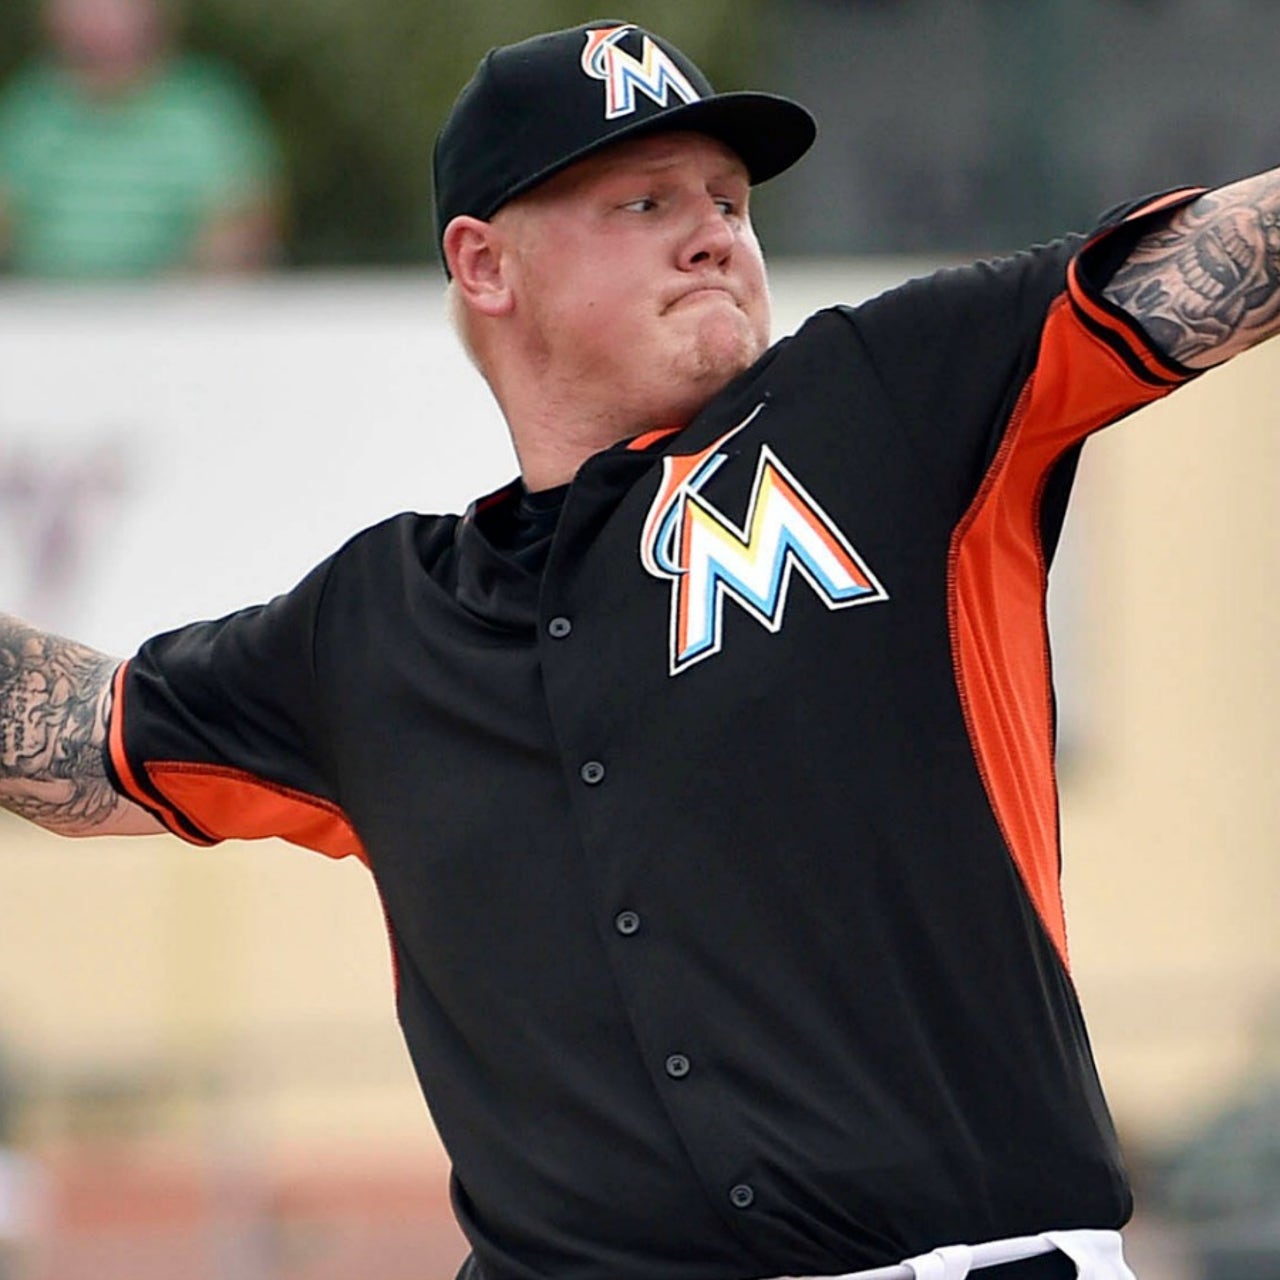 Latos improves significantly, Marlins and Astros tie 1-1